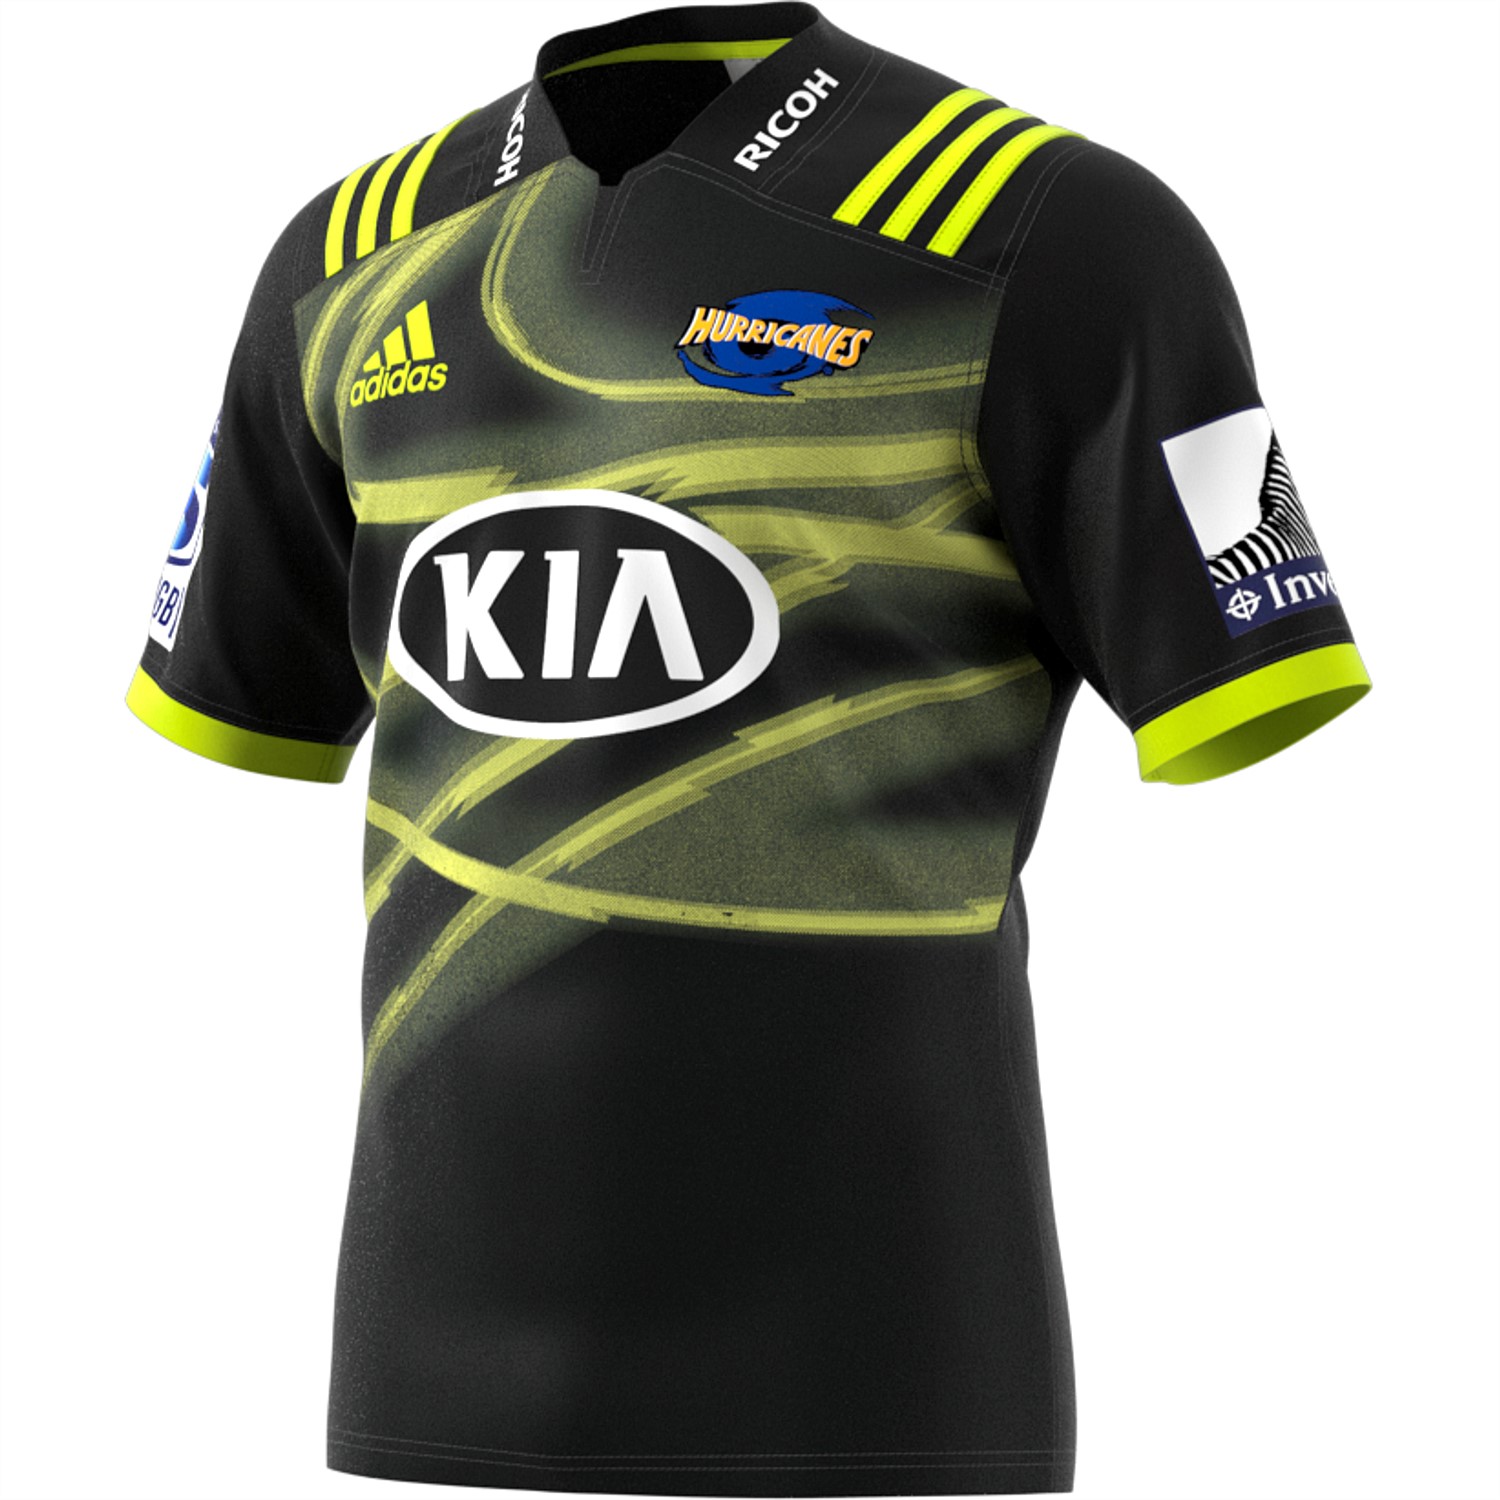 hurricanes jersey for sale